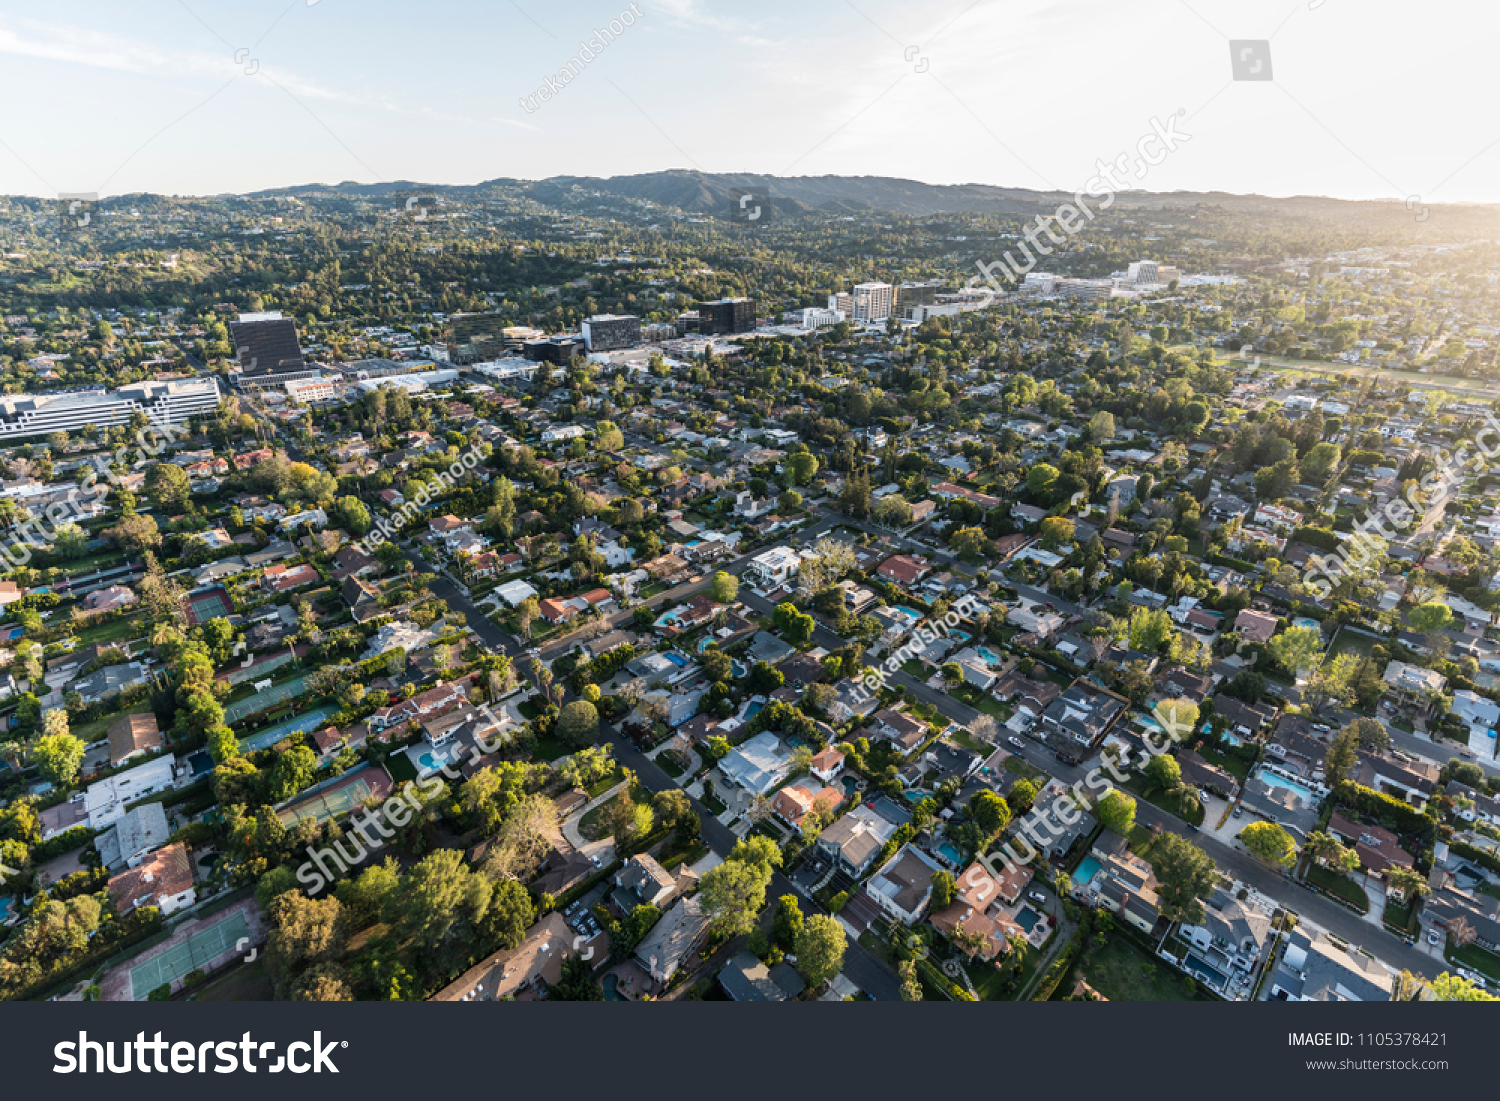 Late afternoon aerial view of Sherman Oaks and Encino in the San Fernando Valley area of Los Angeles, California. #1105378421